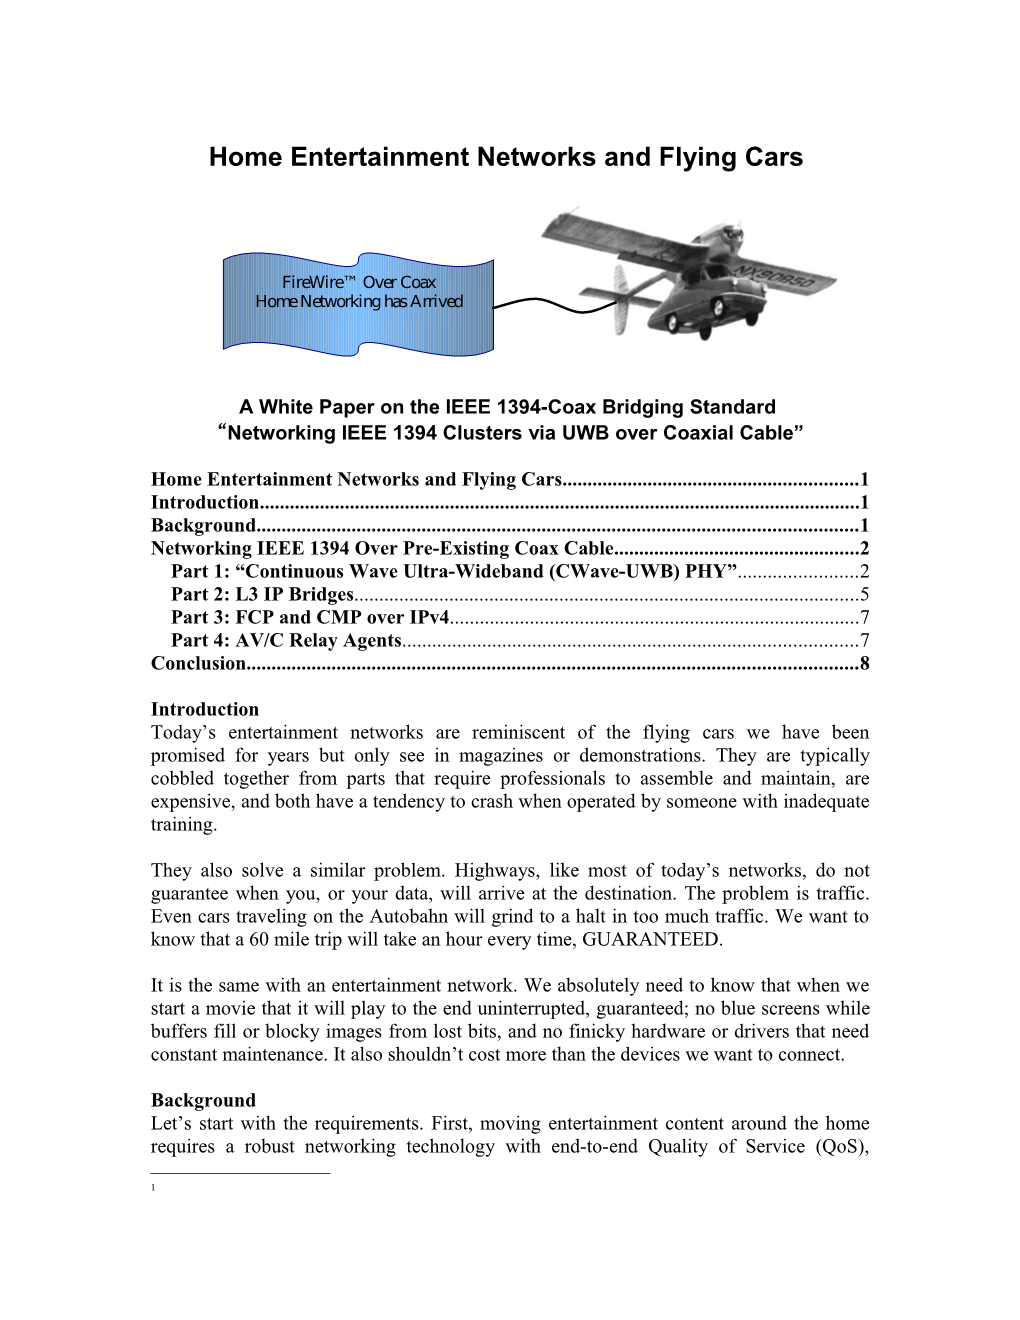 Home Networking and Flying Cars